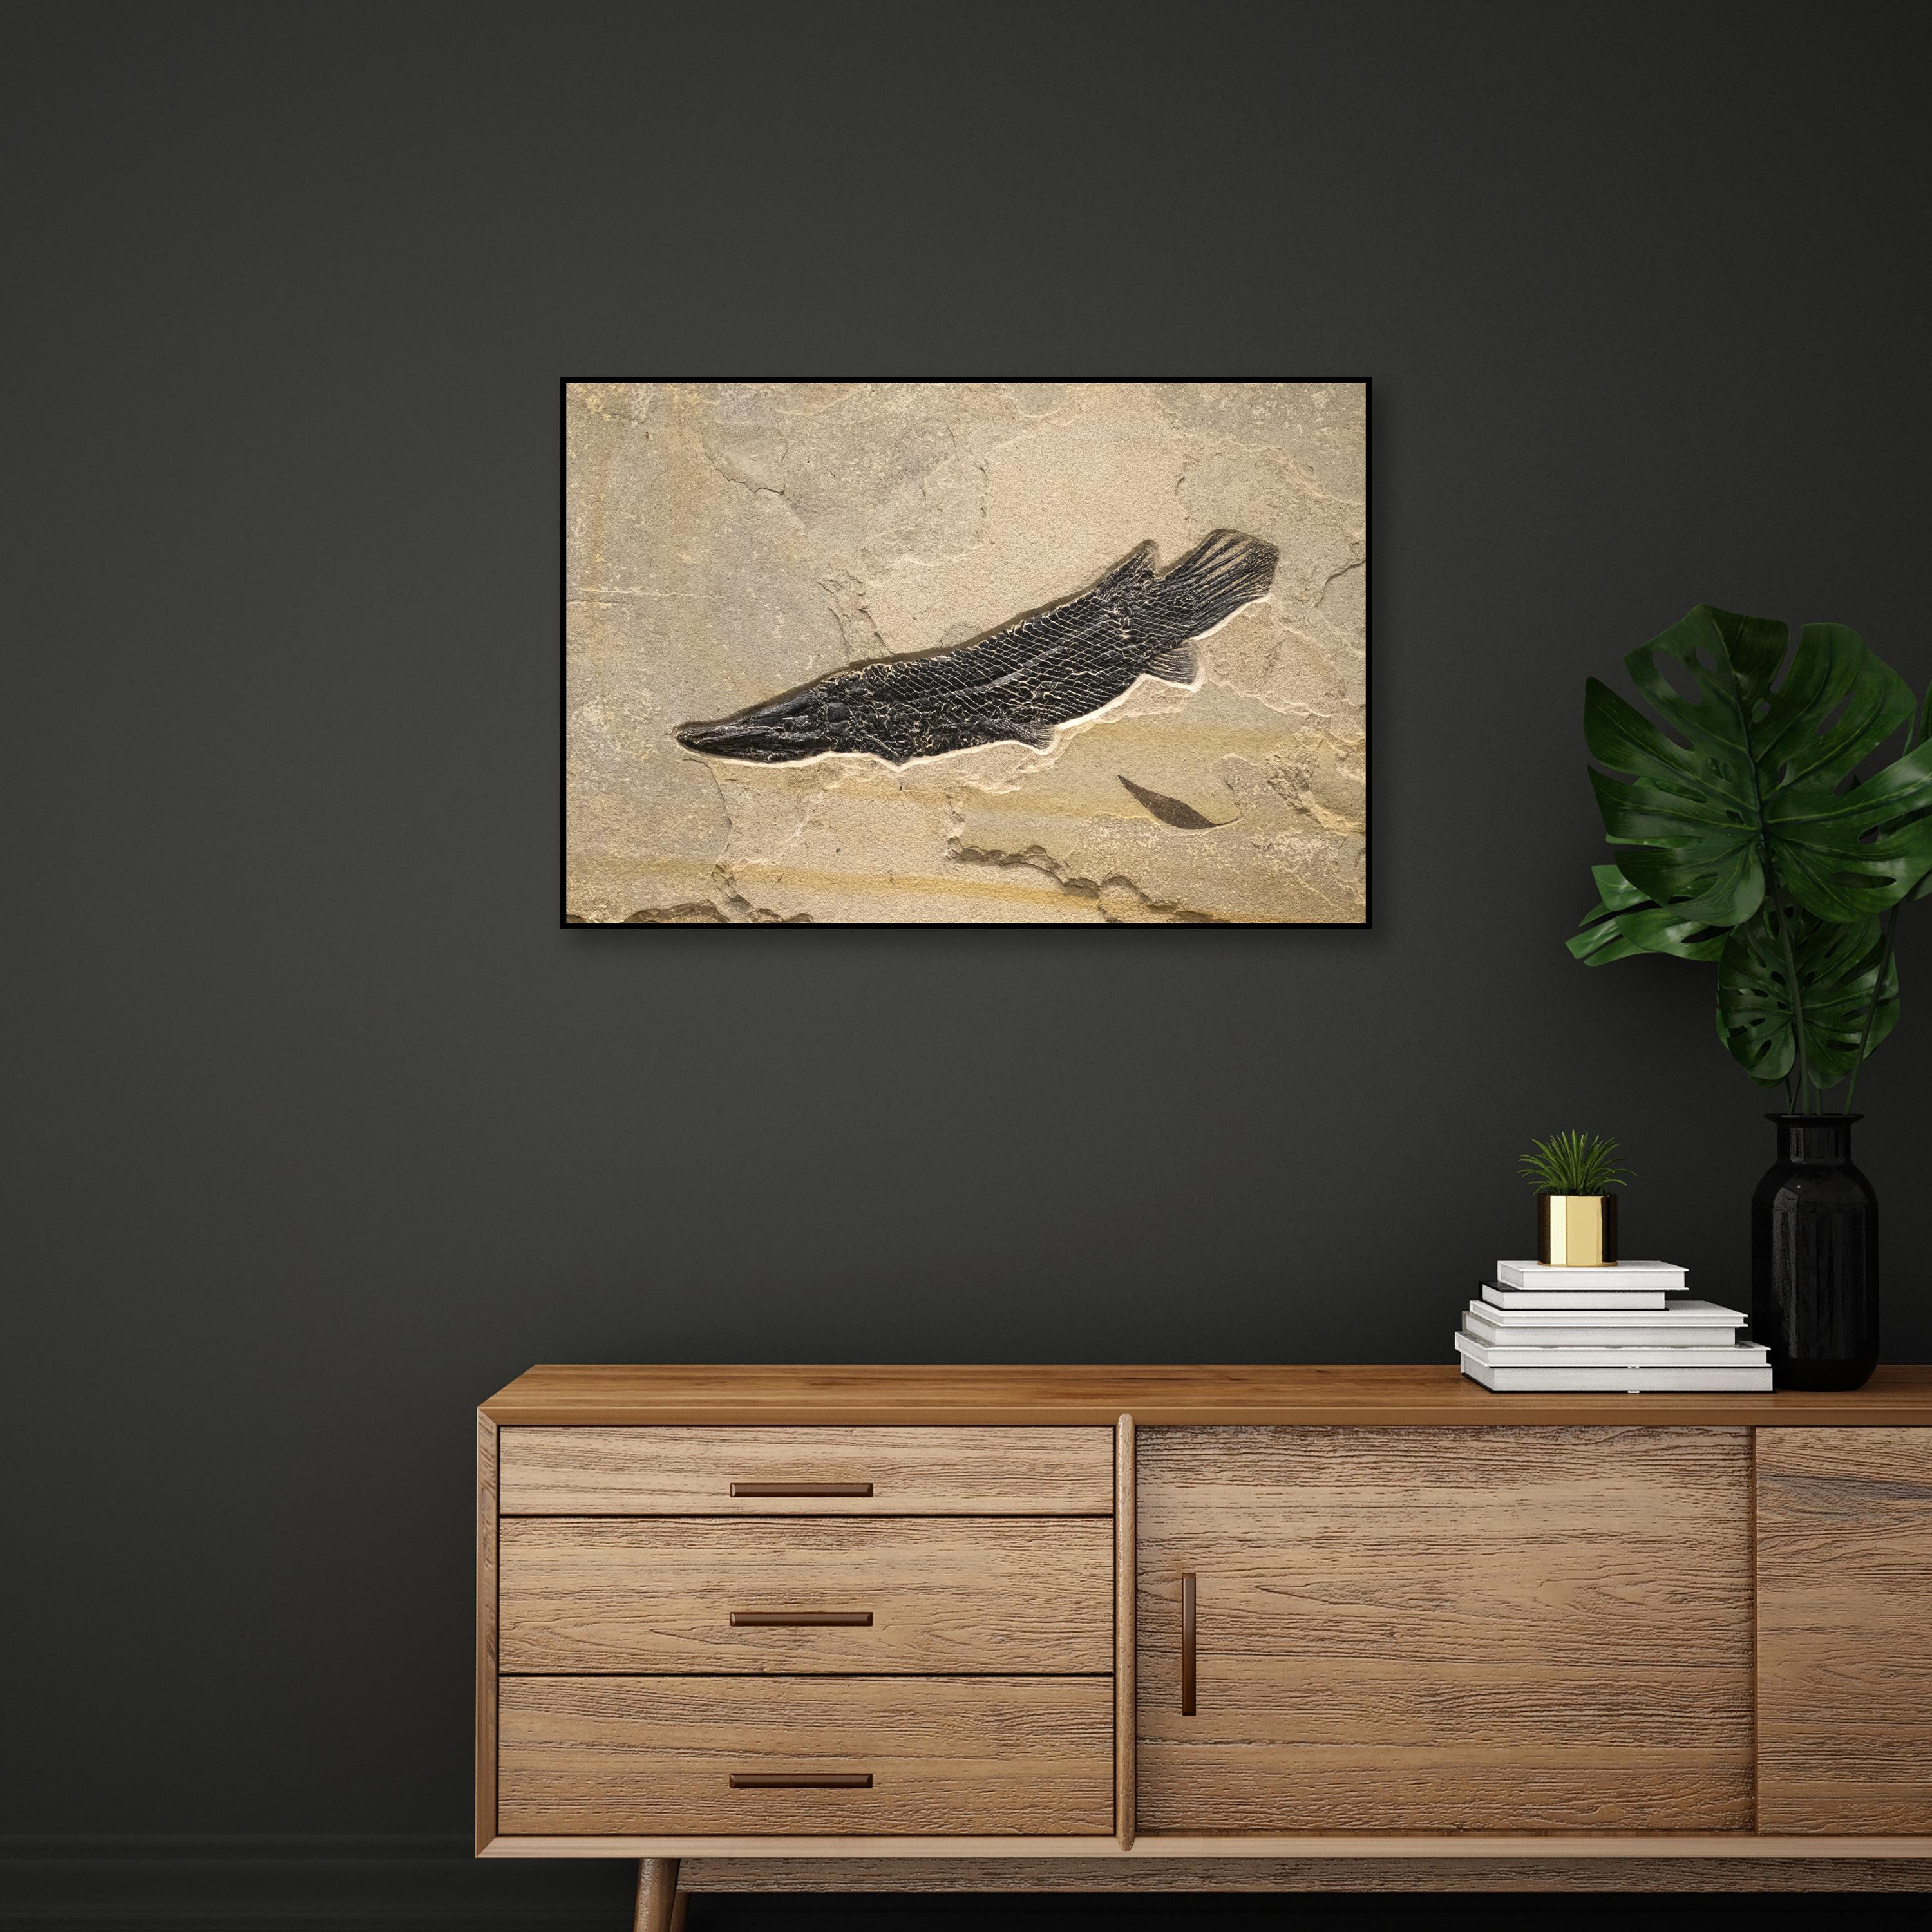 This unique fossil mural features one gar and one fossil leaf, both of which are Eocene era fossils dating back about 50 million years. This rare gar is beautifully detailed, and is forever preserved in a gorgeously textured matrix of natural,